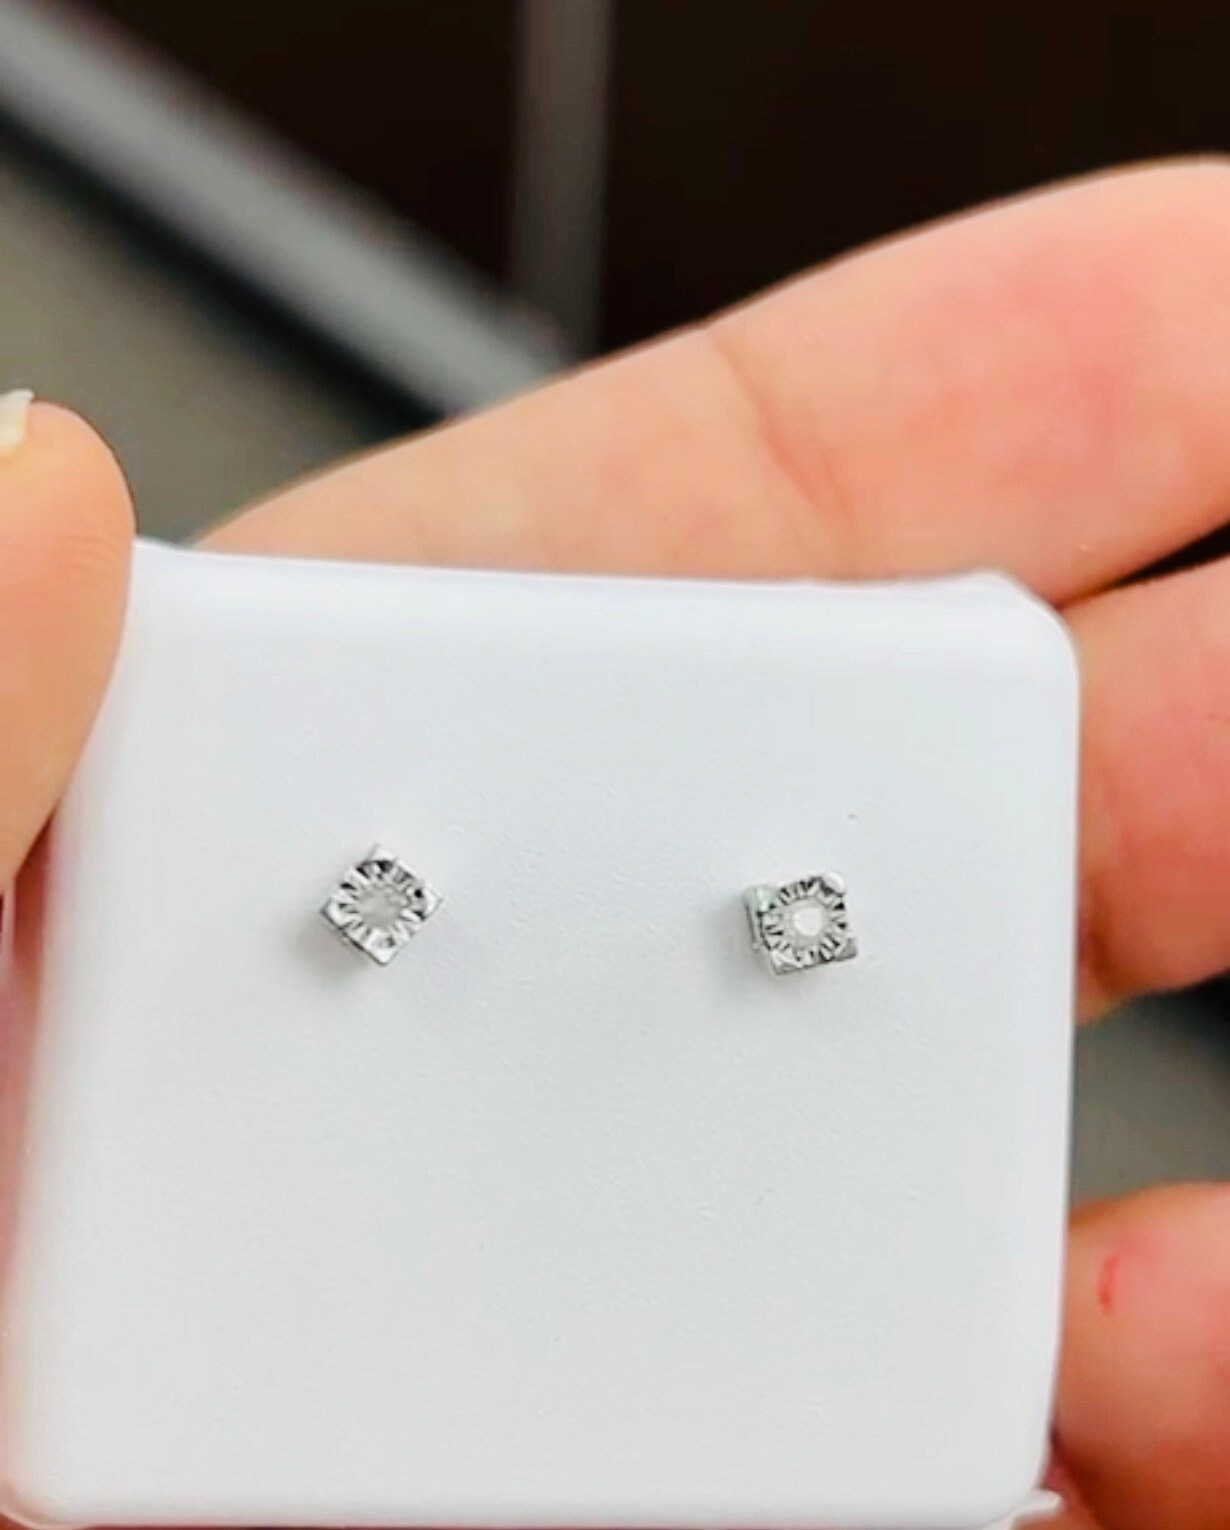 Real diamond solitaire studs 3mm, natural genuine diamond gold vermeil beautiful elegant gifts for her, gift for him, Christmas Gifts, Sale!